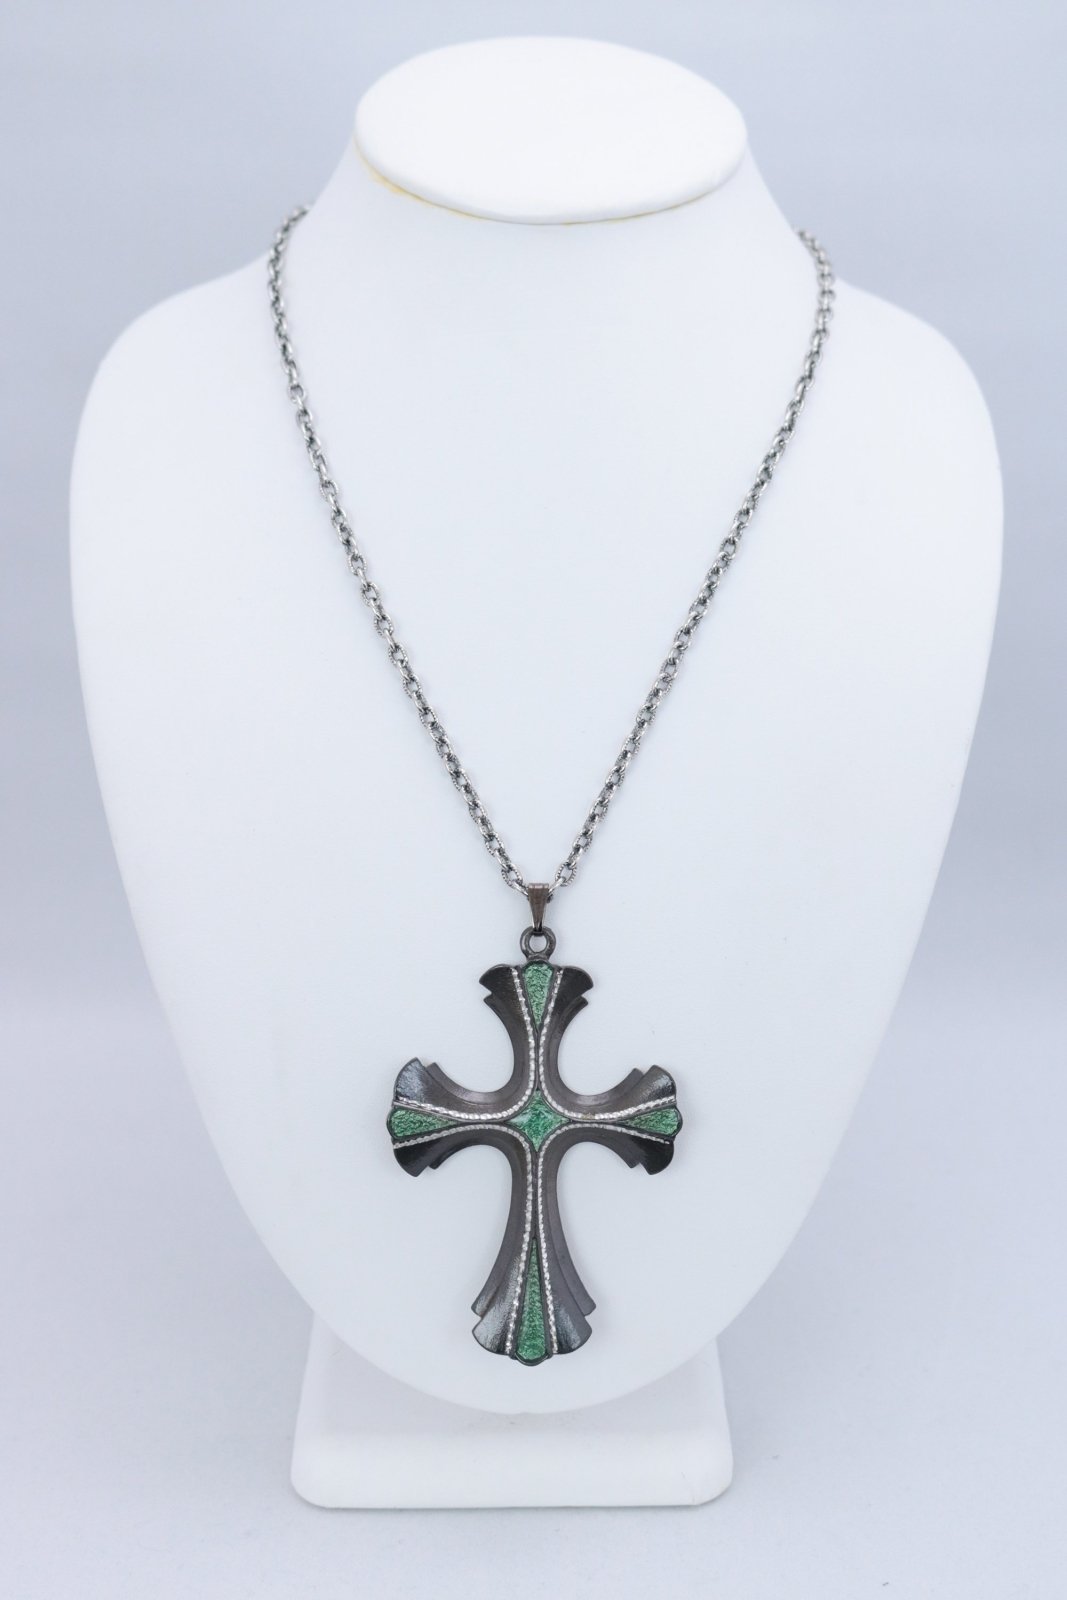 1976 Limited Edition Sarah Coventry 18th Century Cross Necklace - Floria Vintage